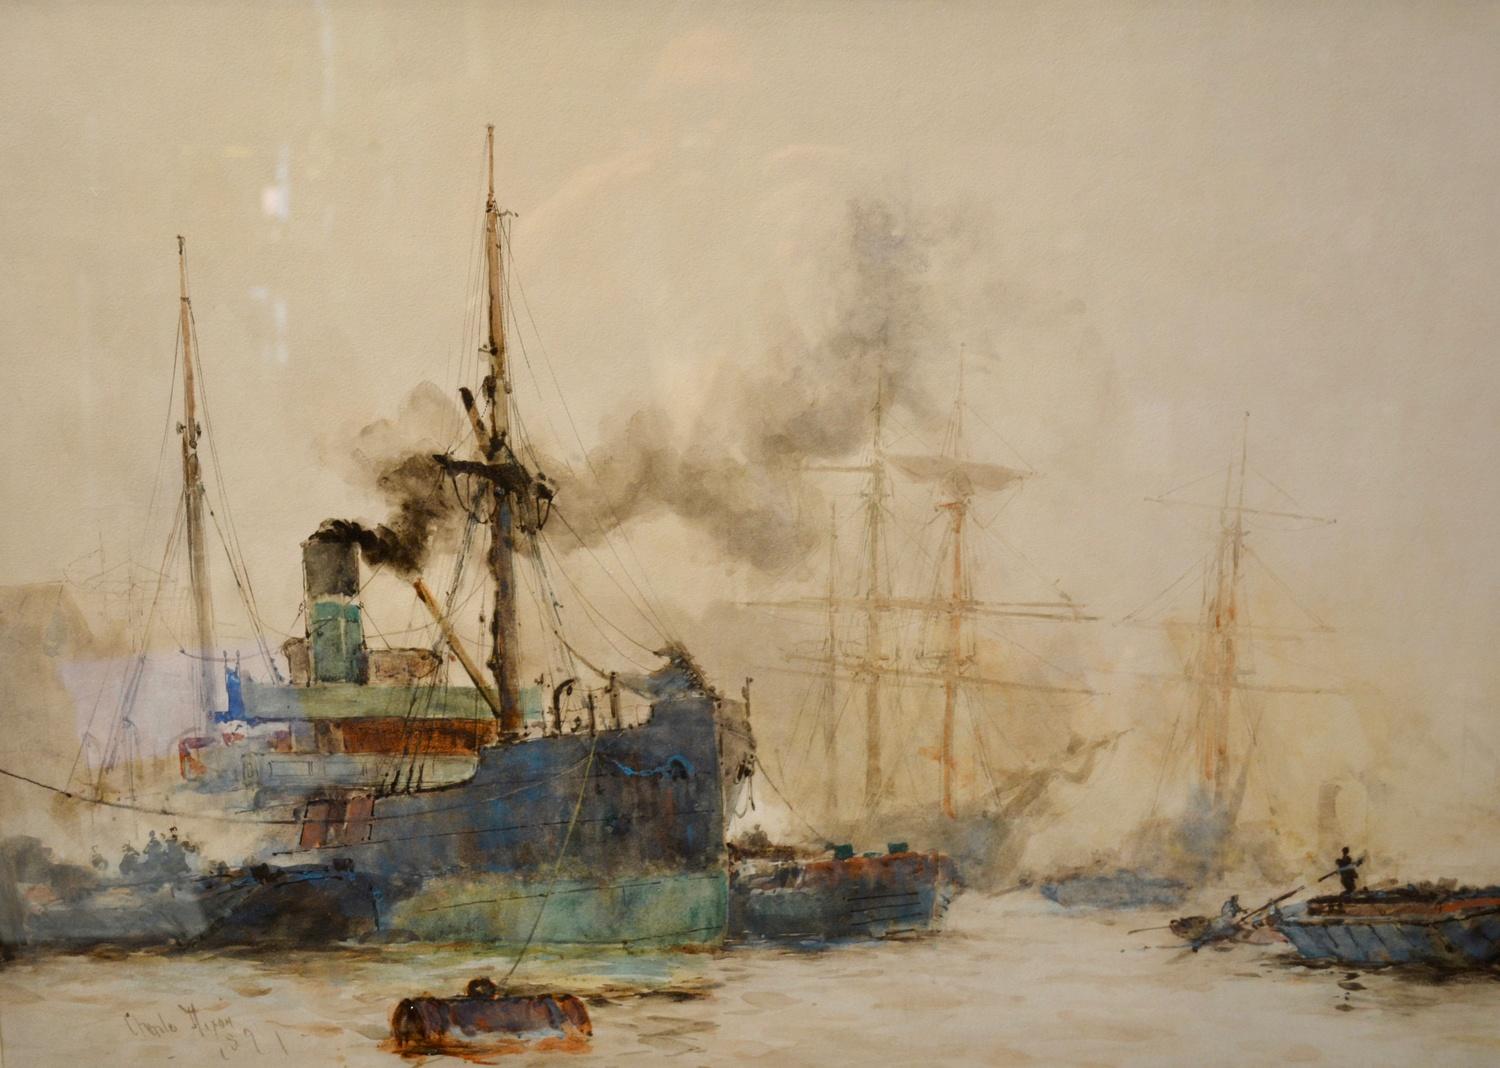 Charles Edward Dixon, 1872-1934, Working Thames, watercolour, signed and dated 1891, 39 x 55.5cm